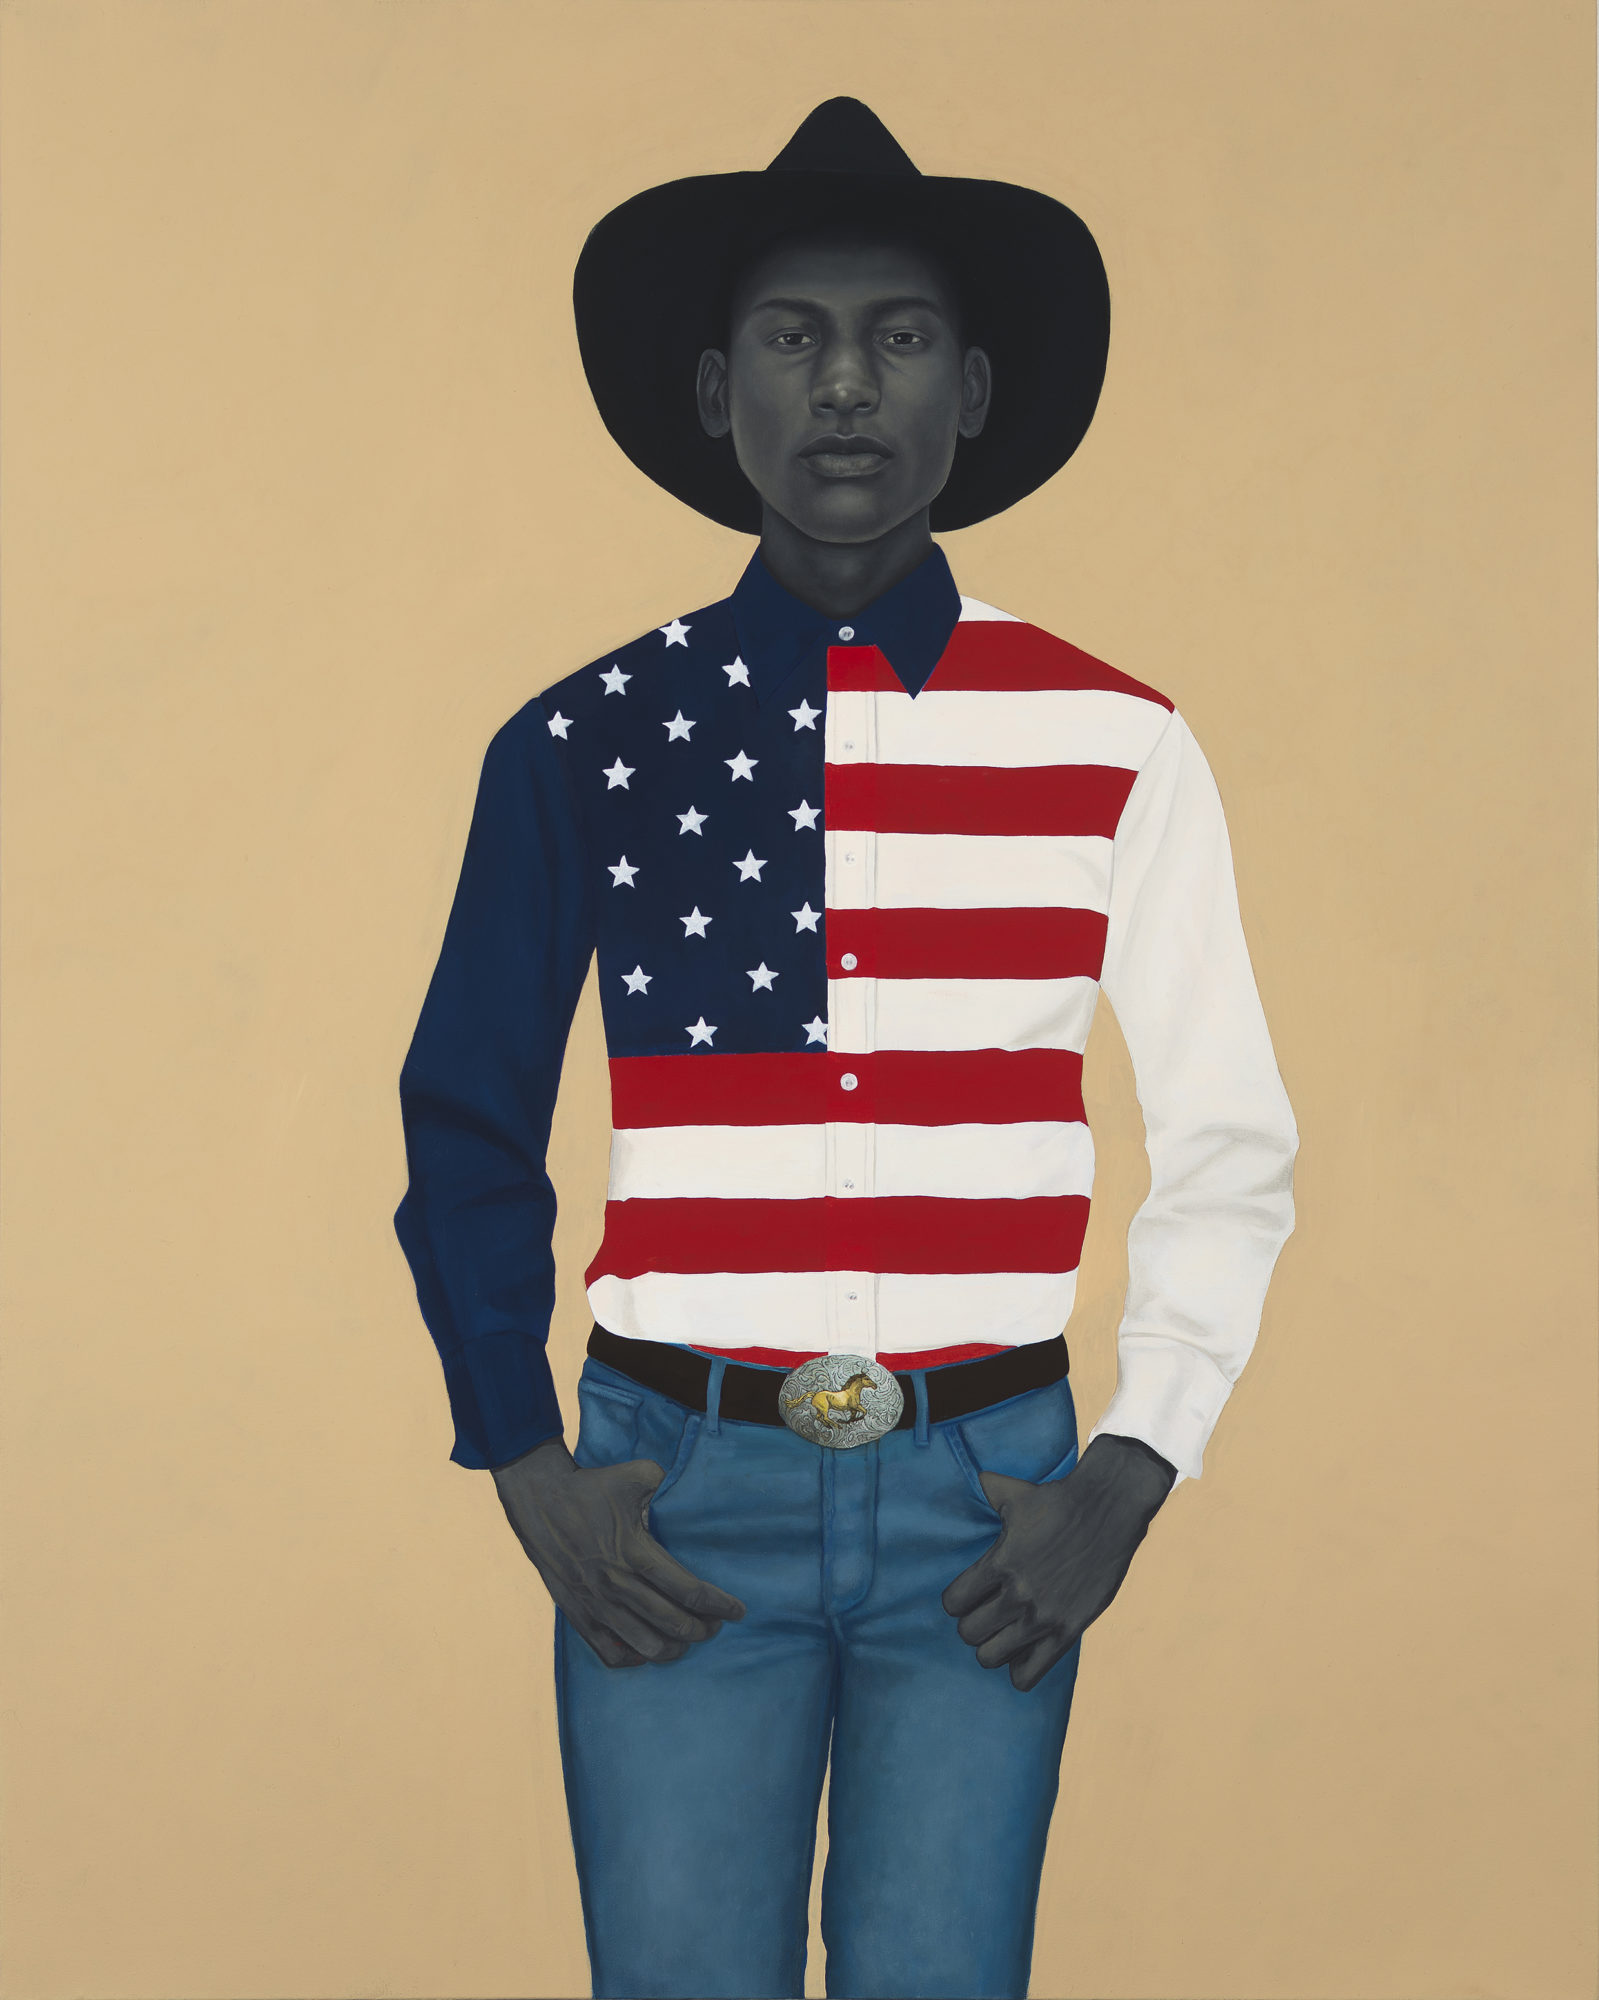 A man in a cowboy hat and an American flag button up shirt stands in front of a tan background